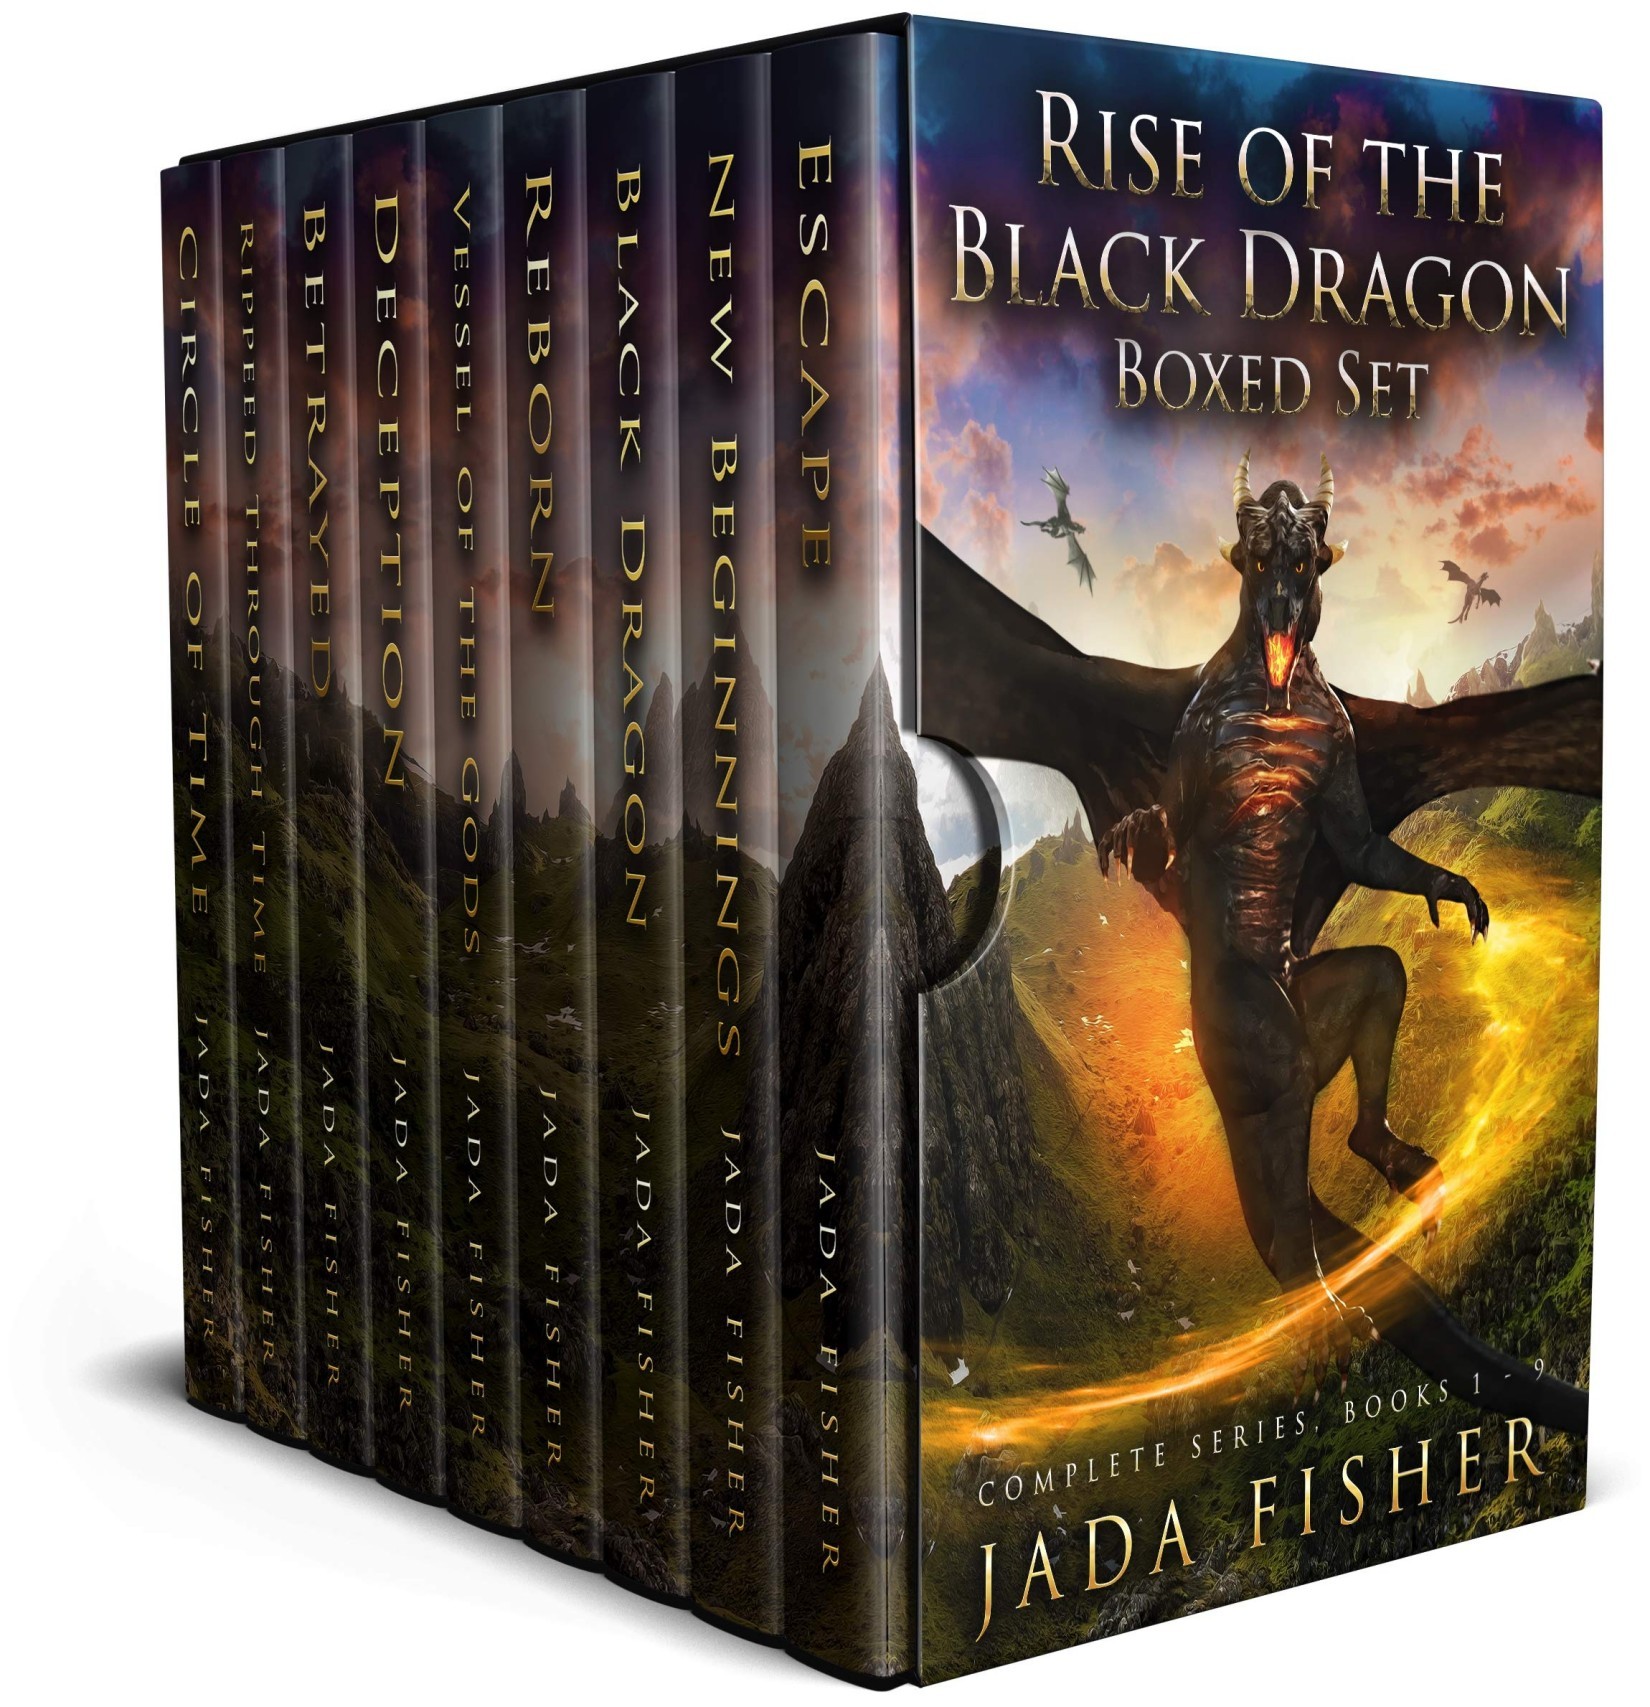 Rise of the Black Dragon Boxed Set: Complete Series: Books 1 - 9